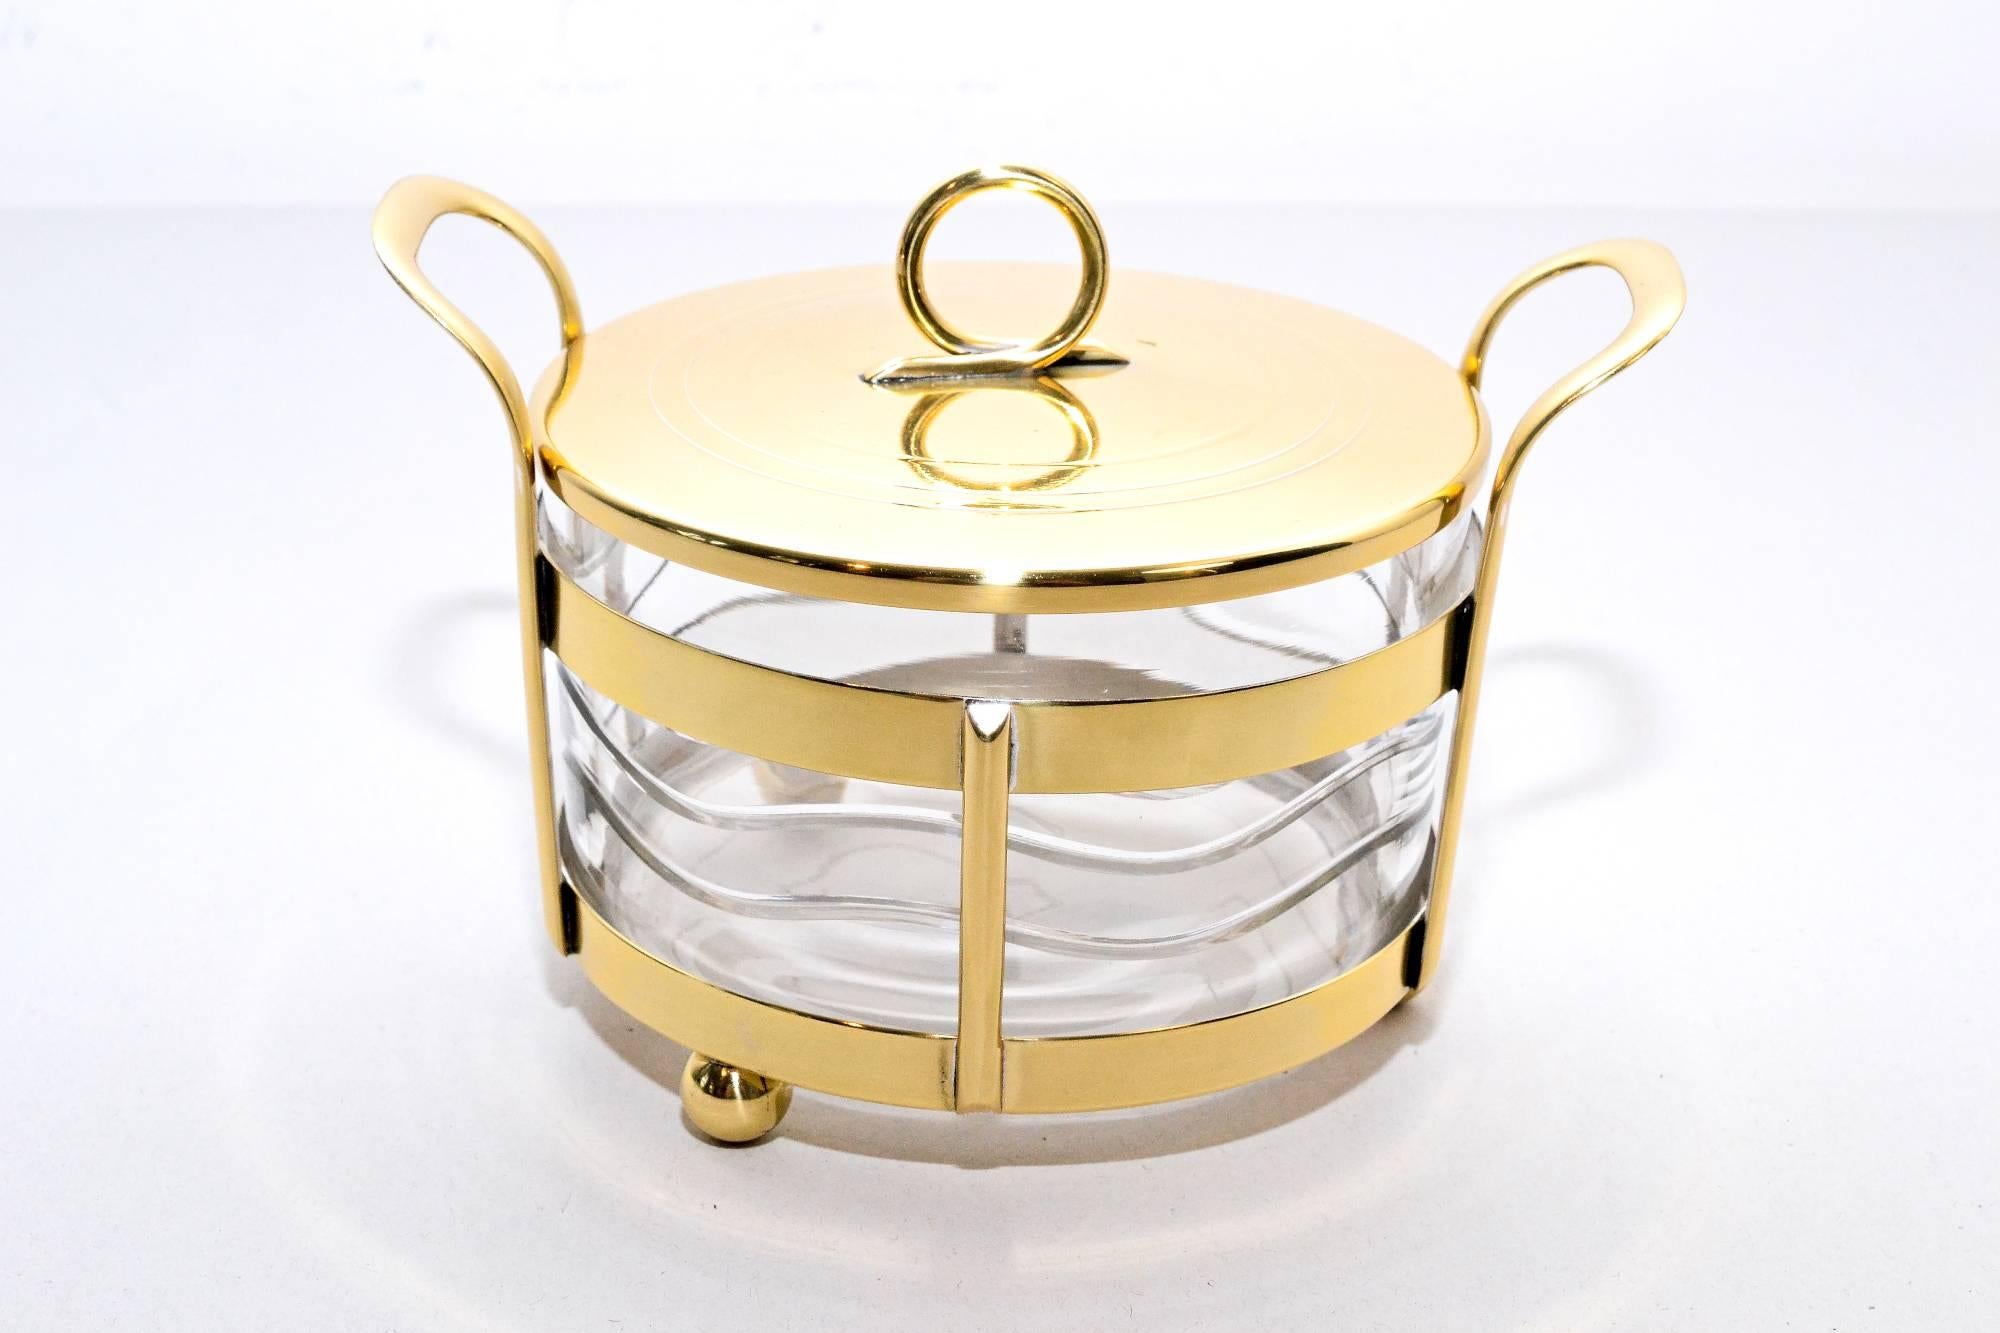 Sugar bowl with cut glass
polished and stove enameled.